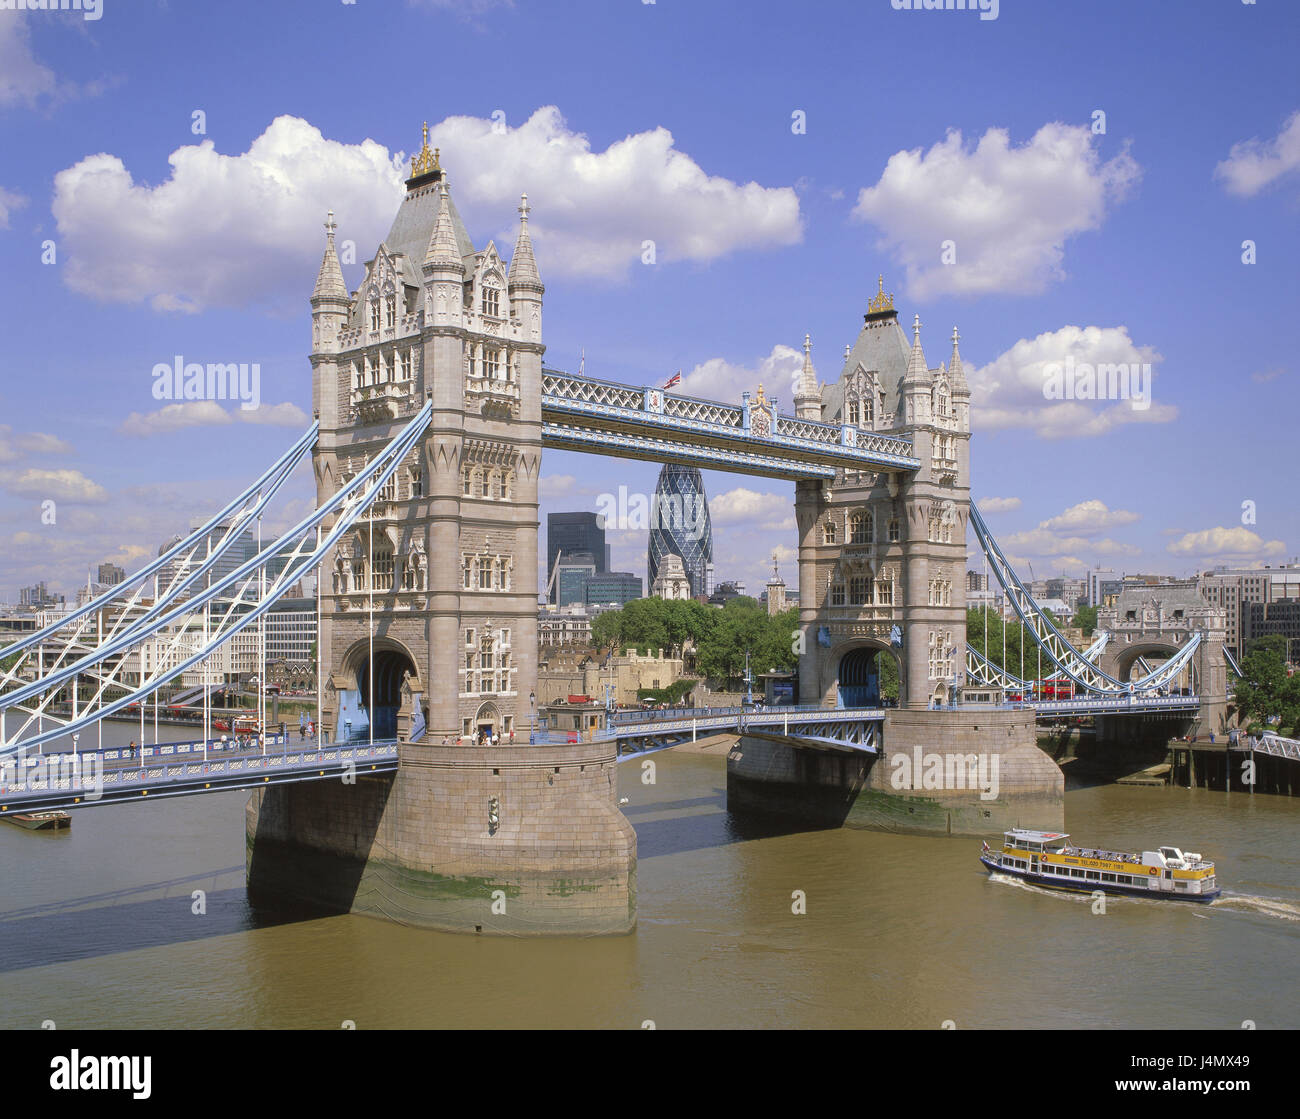 Great Britain, London, Tower Bridge, the Thames Europe, England, town, city, capital, architecture, bridge, balance bridge, Wippbrücke, builds in 1886 - in 1894, architect sir Horace Jones, place of interest, landmark, construction, masonry, steel, Long 286.5 m, river, Thames, ship, holiday ship, background Swiss Re Tower Stock Photo